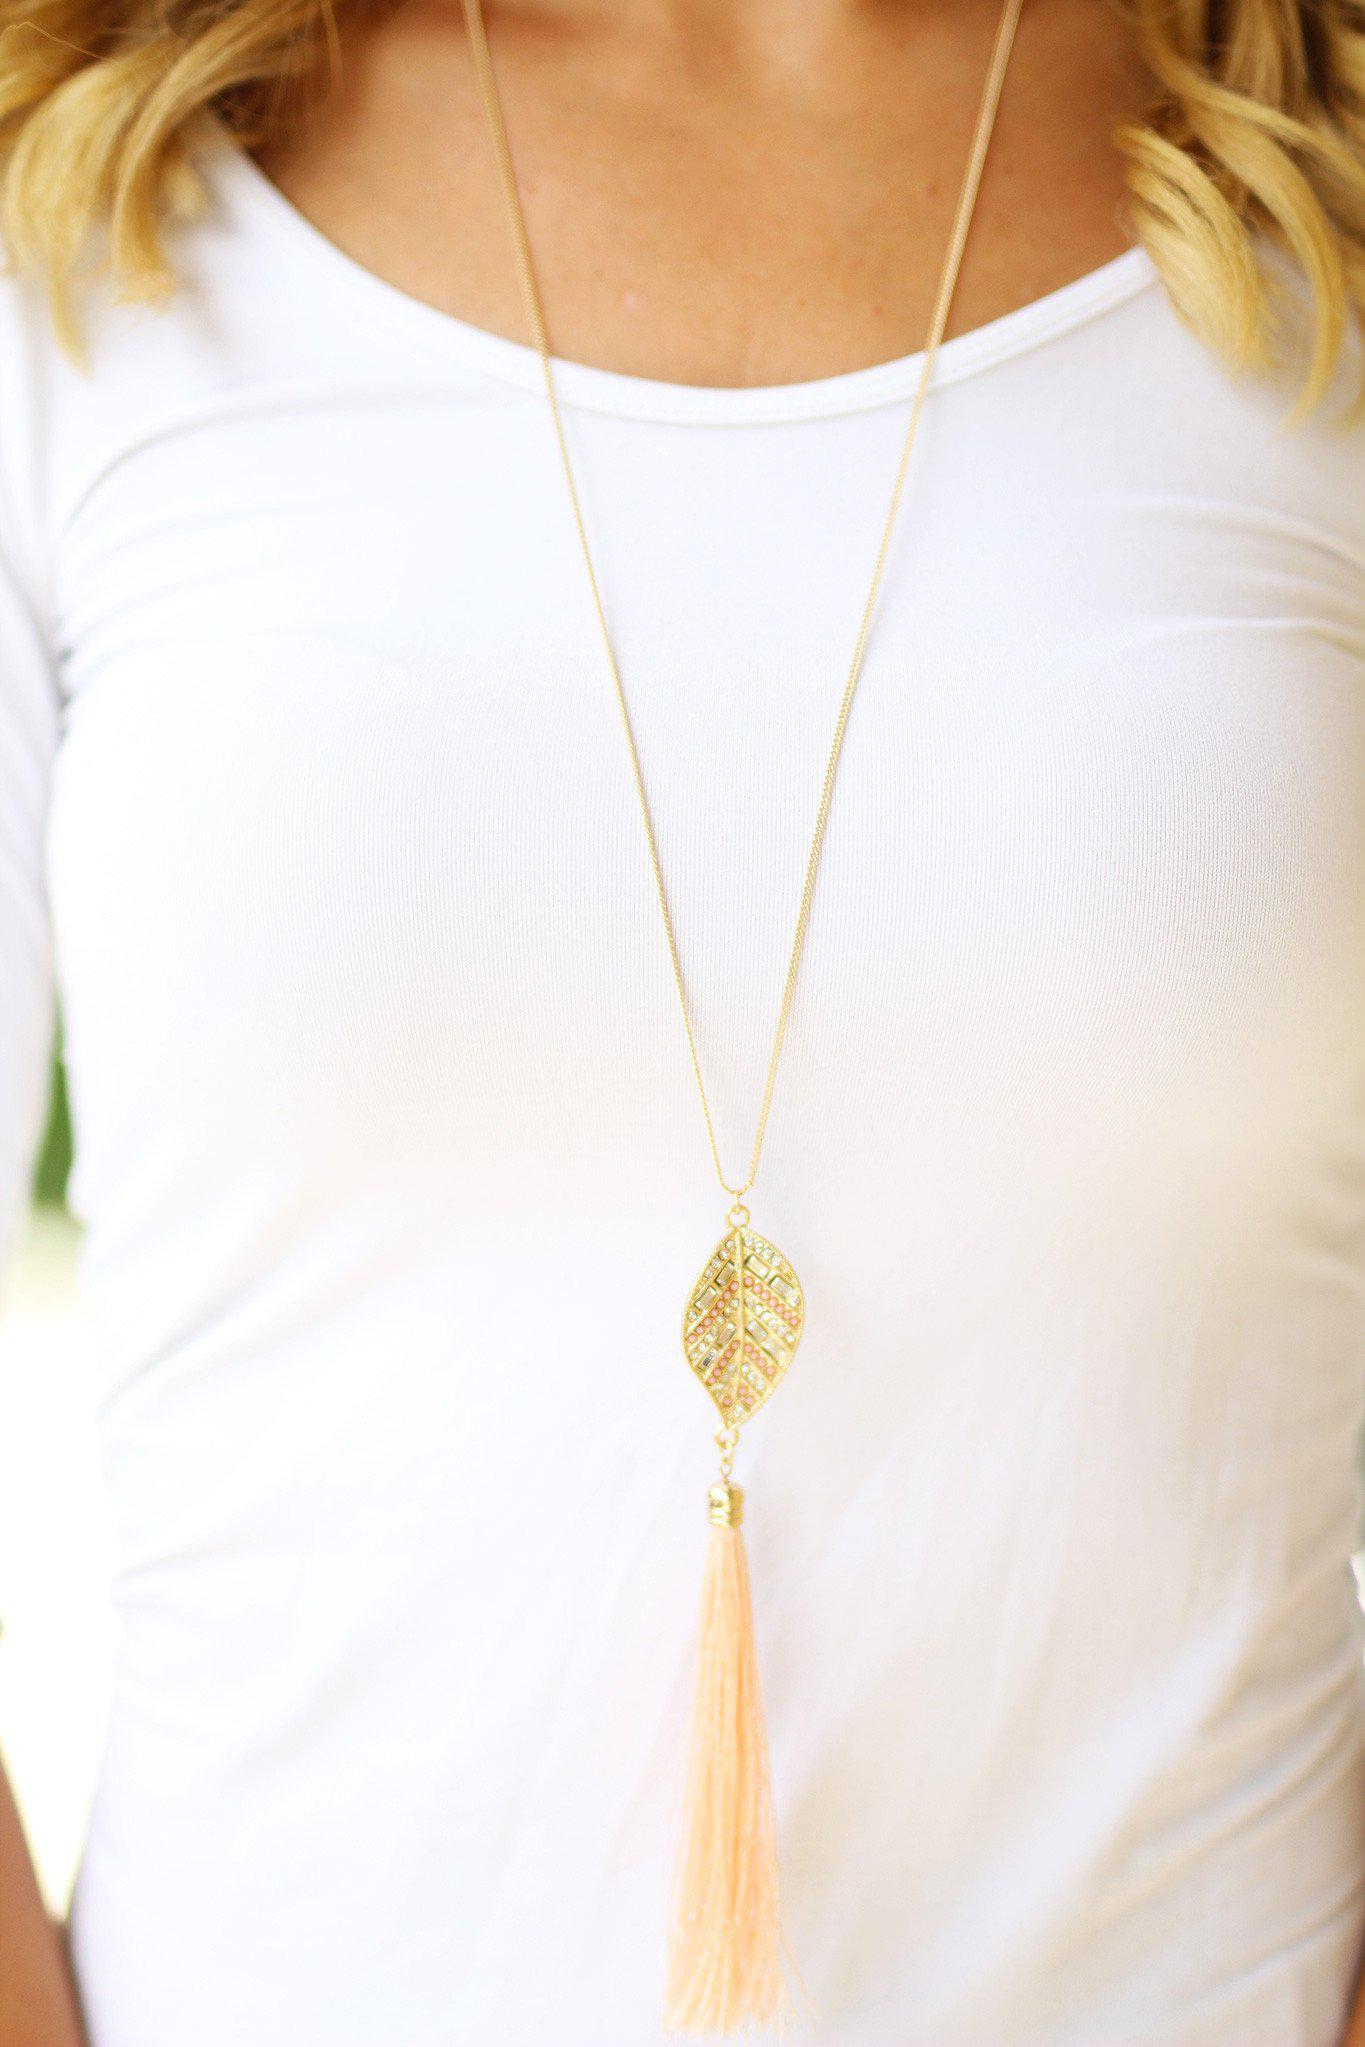 Gold Peach Leaf Necklace with Tassel